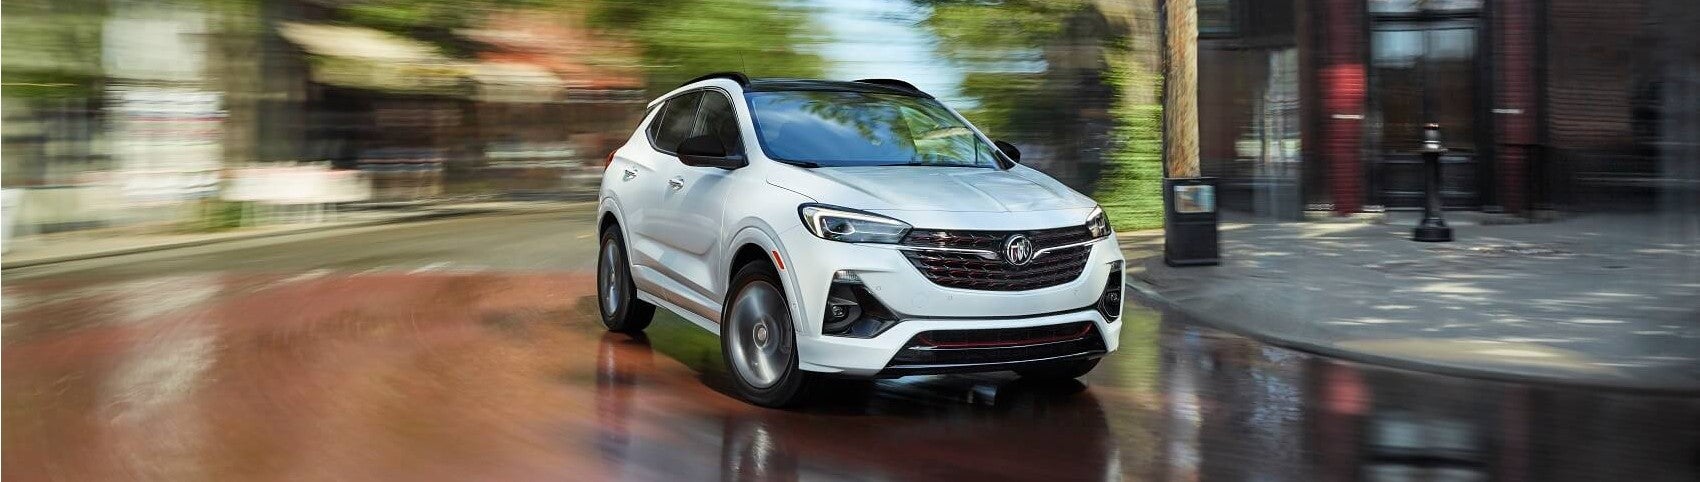 Buick Encore GX in Motion Snipped